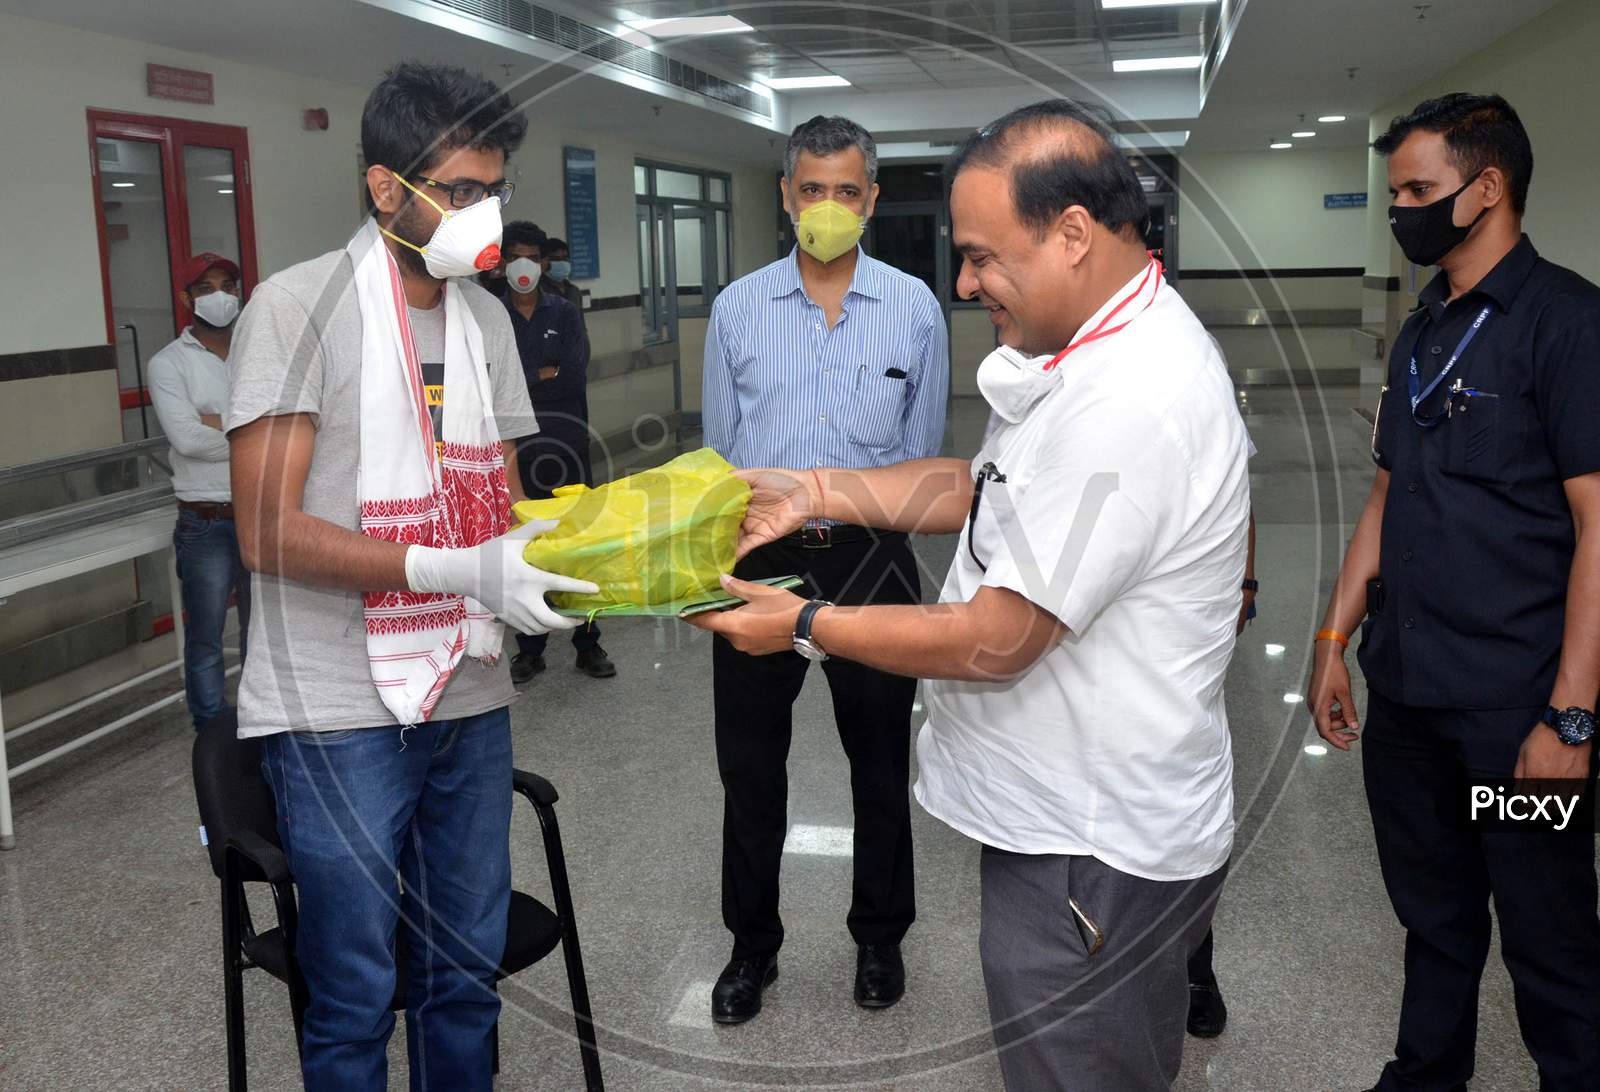 Assam Health And Family Welfare Minister Himanta Biswa Sarma Felicitates And Discharges Dr. Lithikesh Das, A Post-Graduate Student Of Gmch Who Got Recovered From Covid-19, At Gauhati Medical College And Hospital (Gmch), In Guwahati On Wednesday, May 20, 2020.